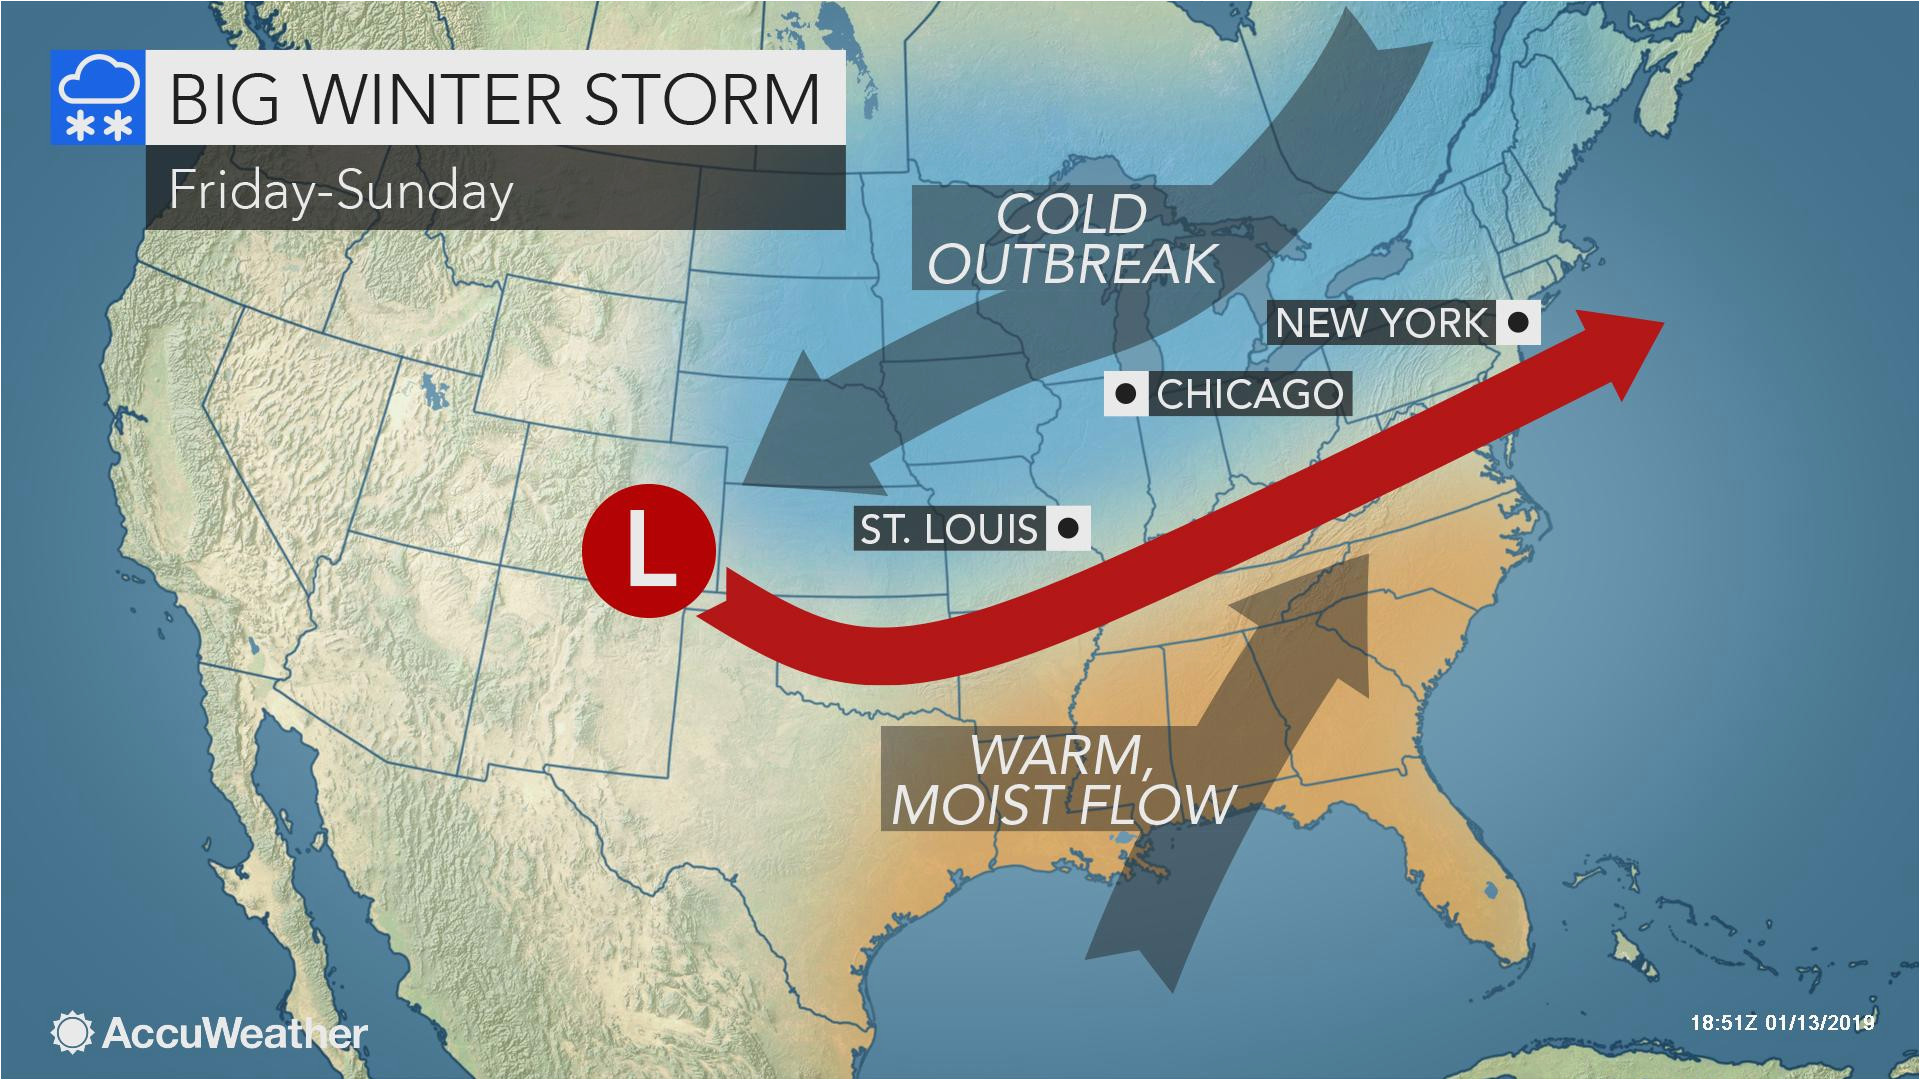 Minnesota Weather Maps Eastern Central Us to Face More Winter Storms Polar Plunge after